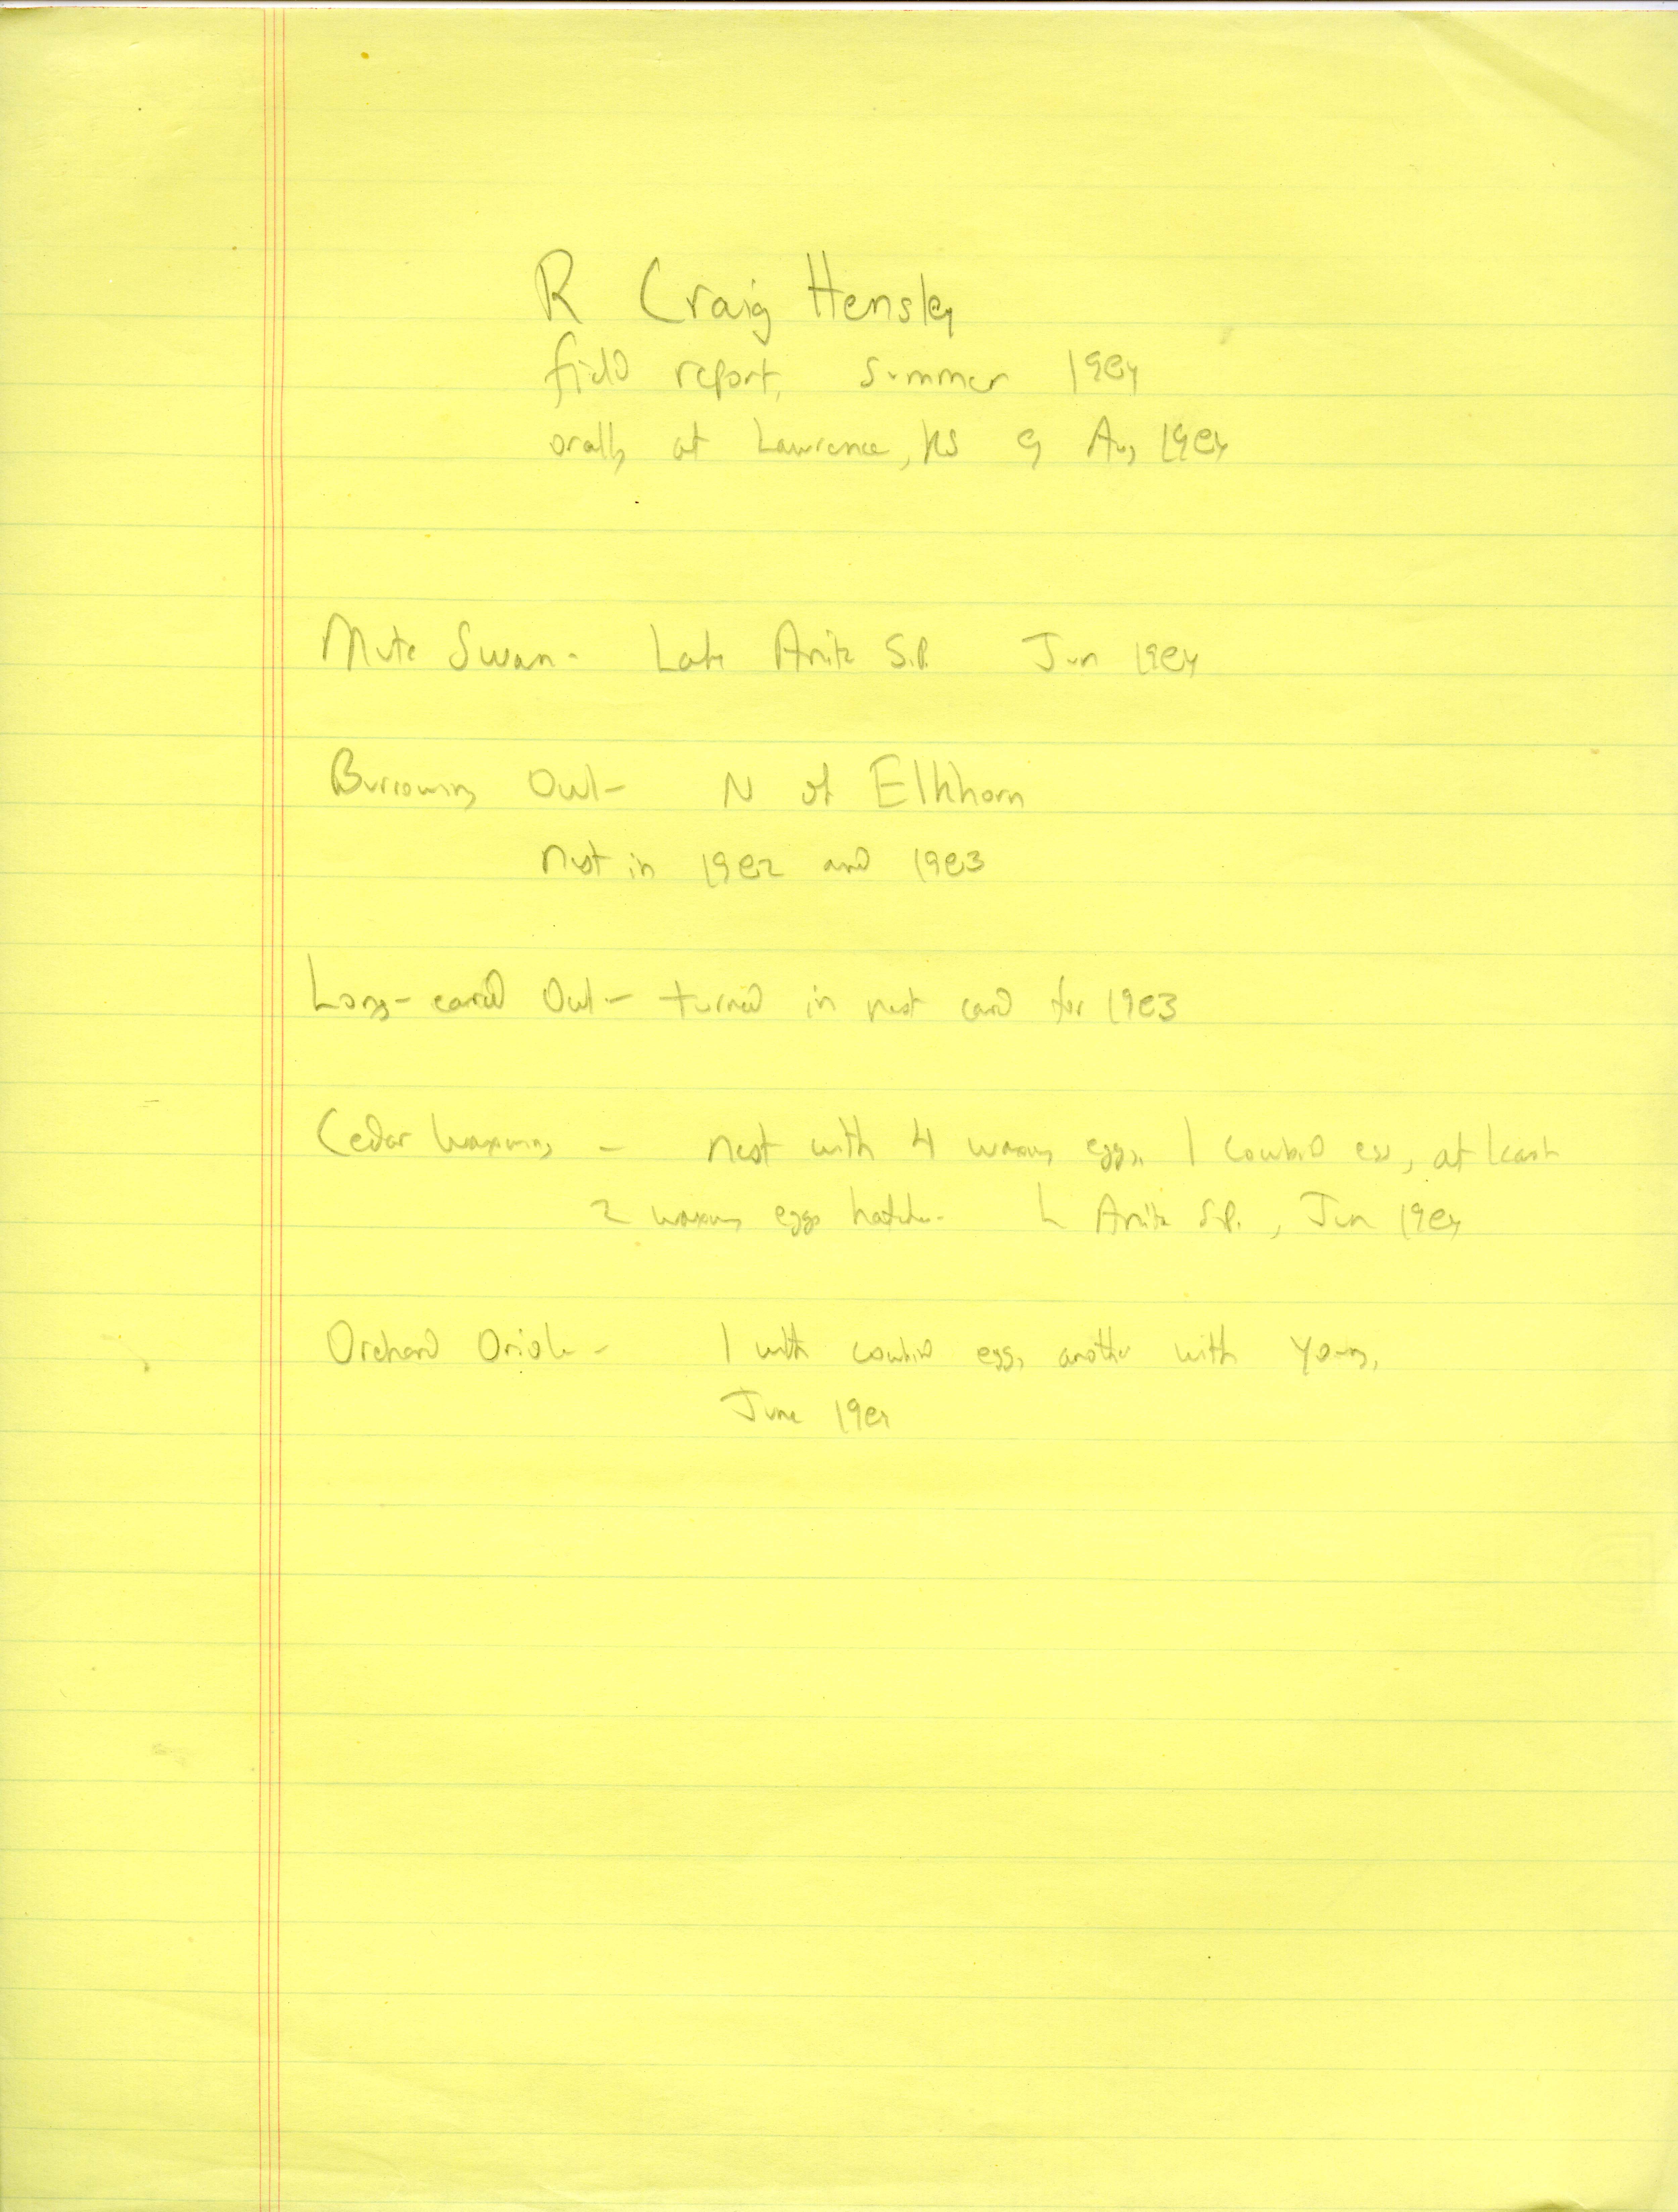 R. Craig Hensley field report, summer 1984, orally at Lawrence, KS, August 9, 1984